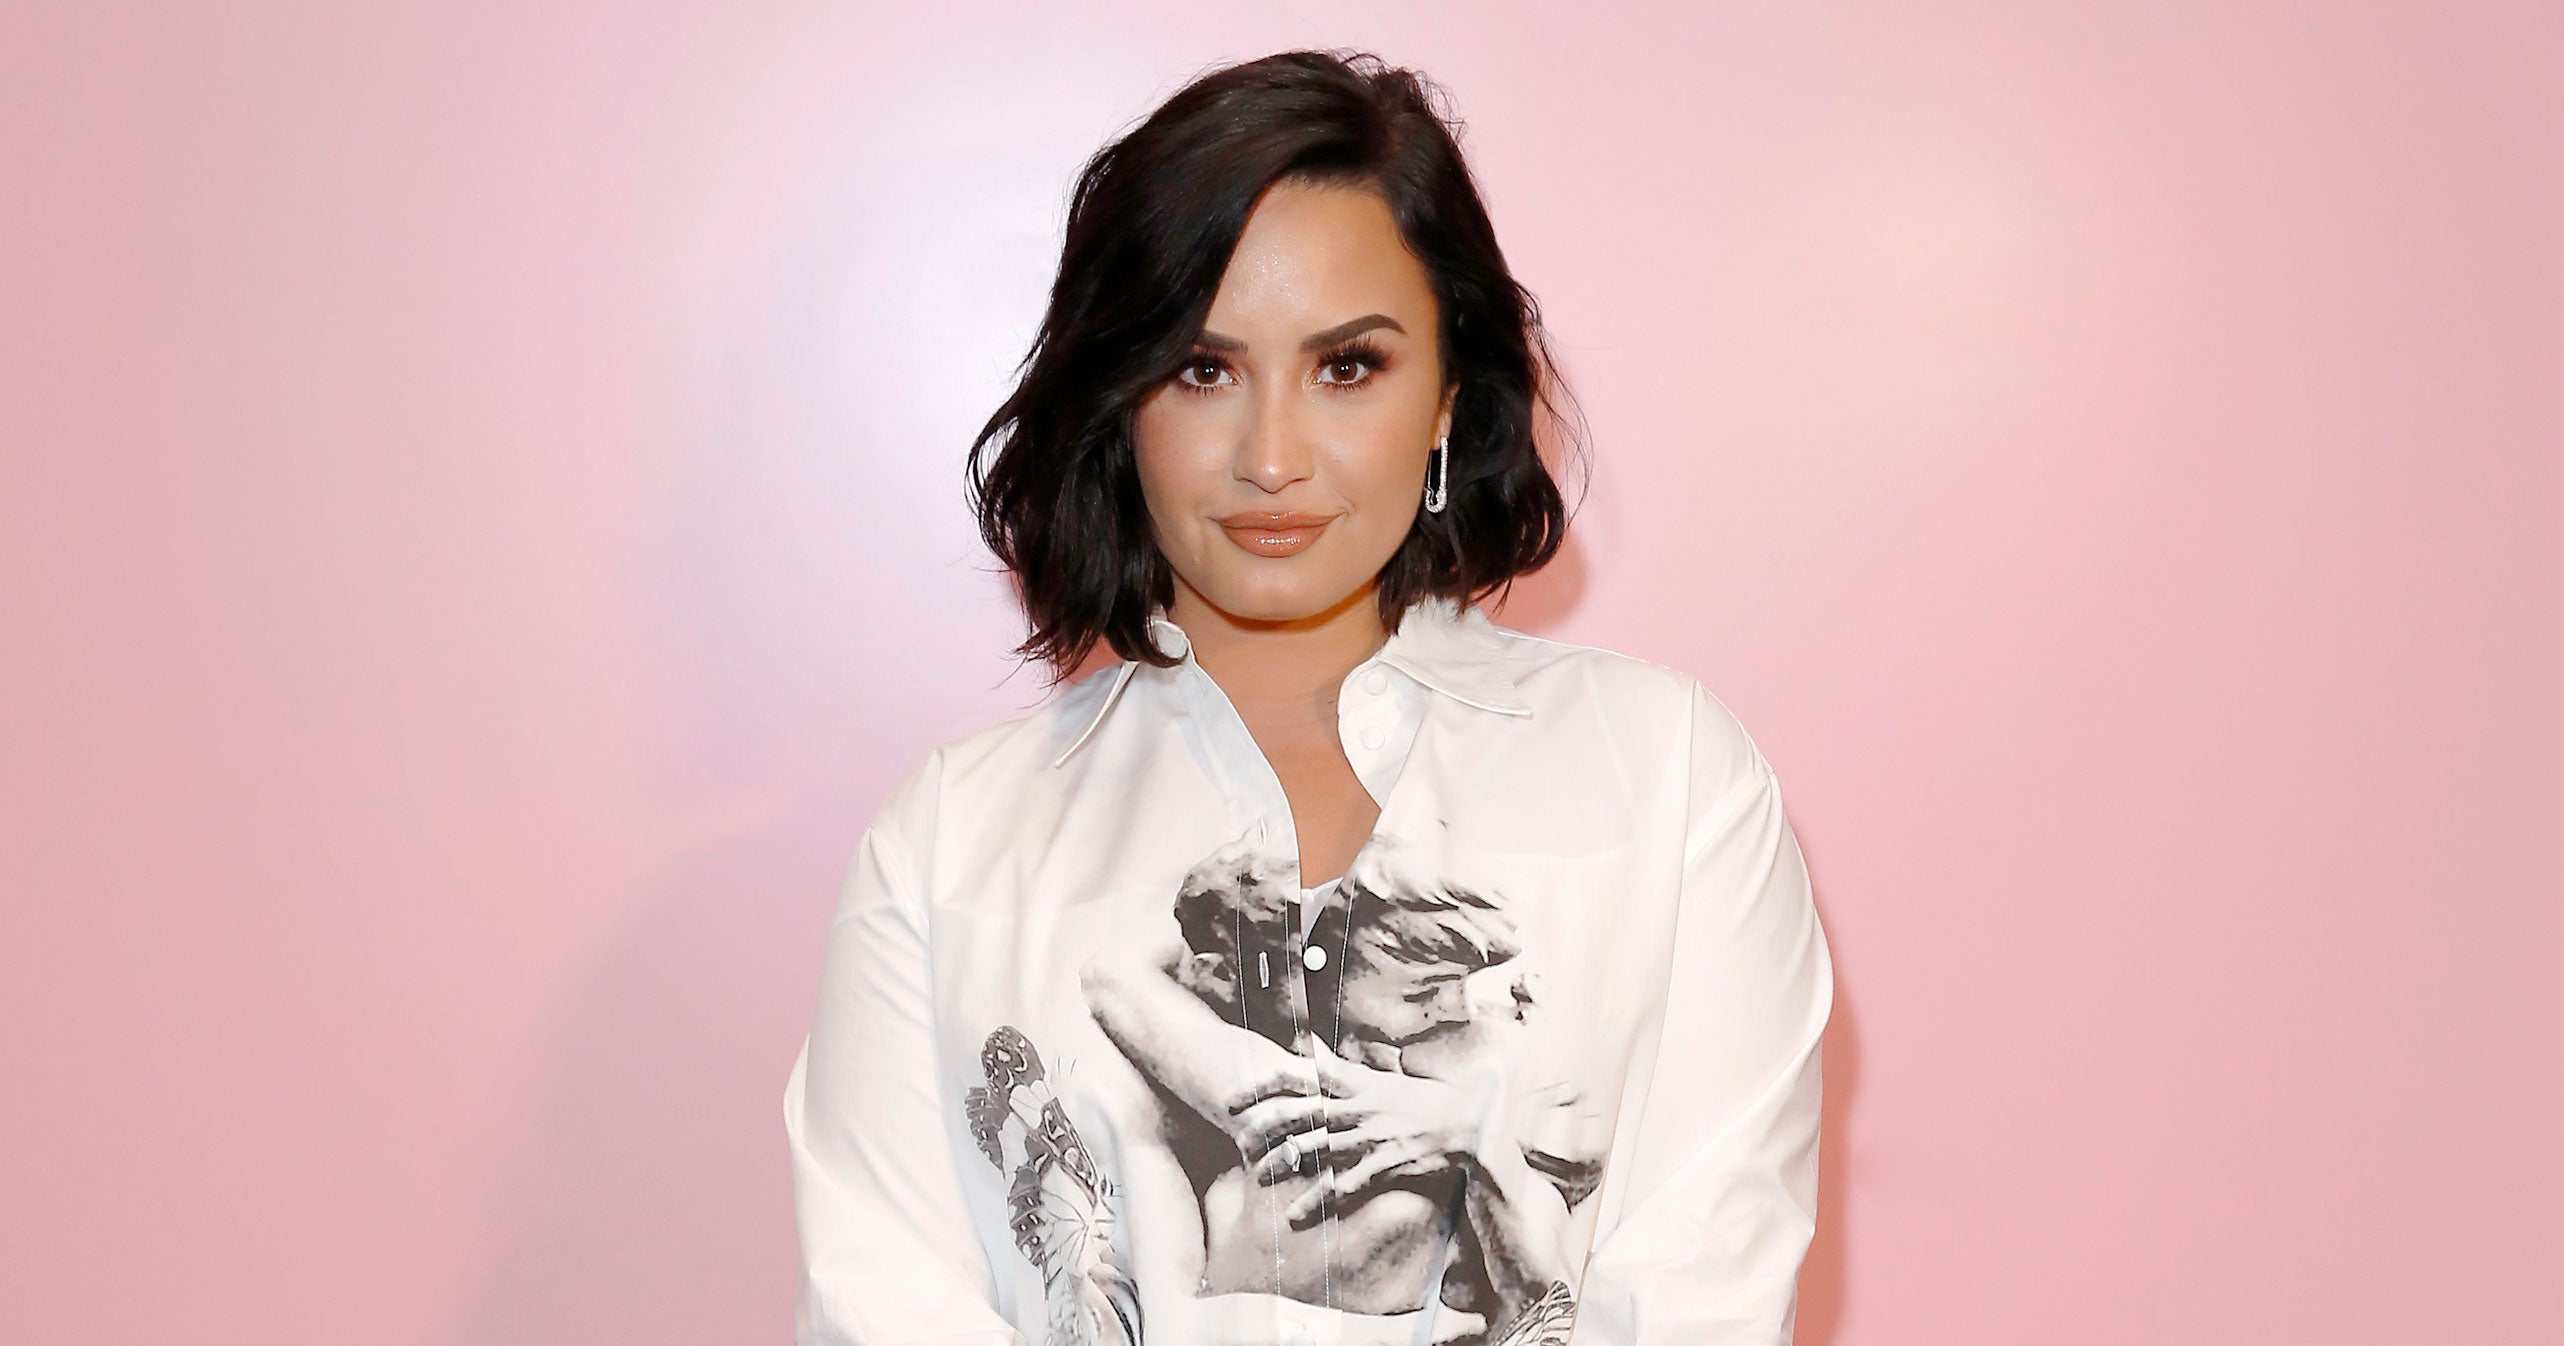 Who Is Demi Lovato Dating Now In 2020? Love Life Update